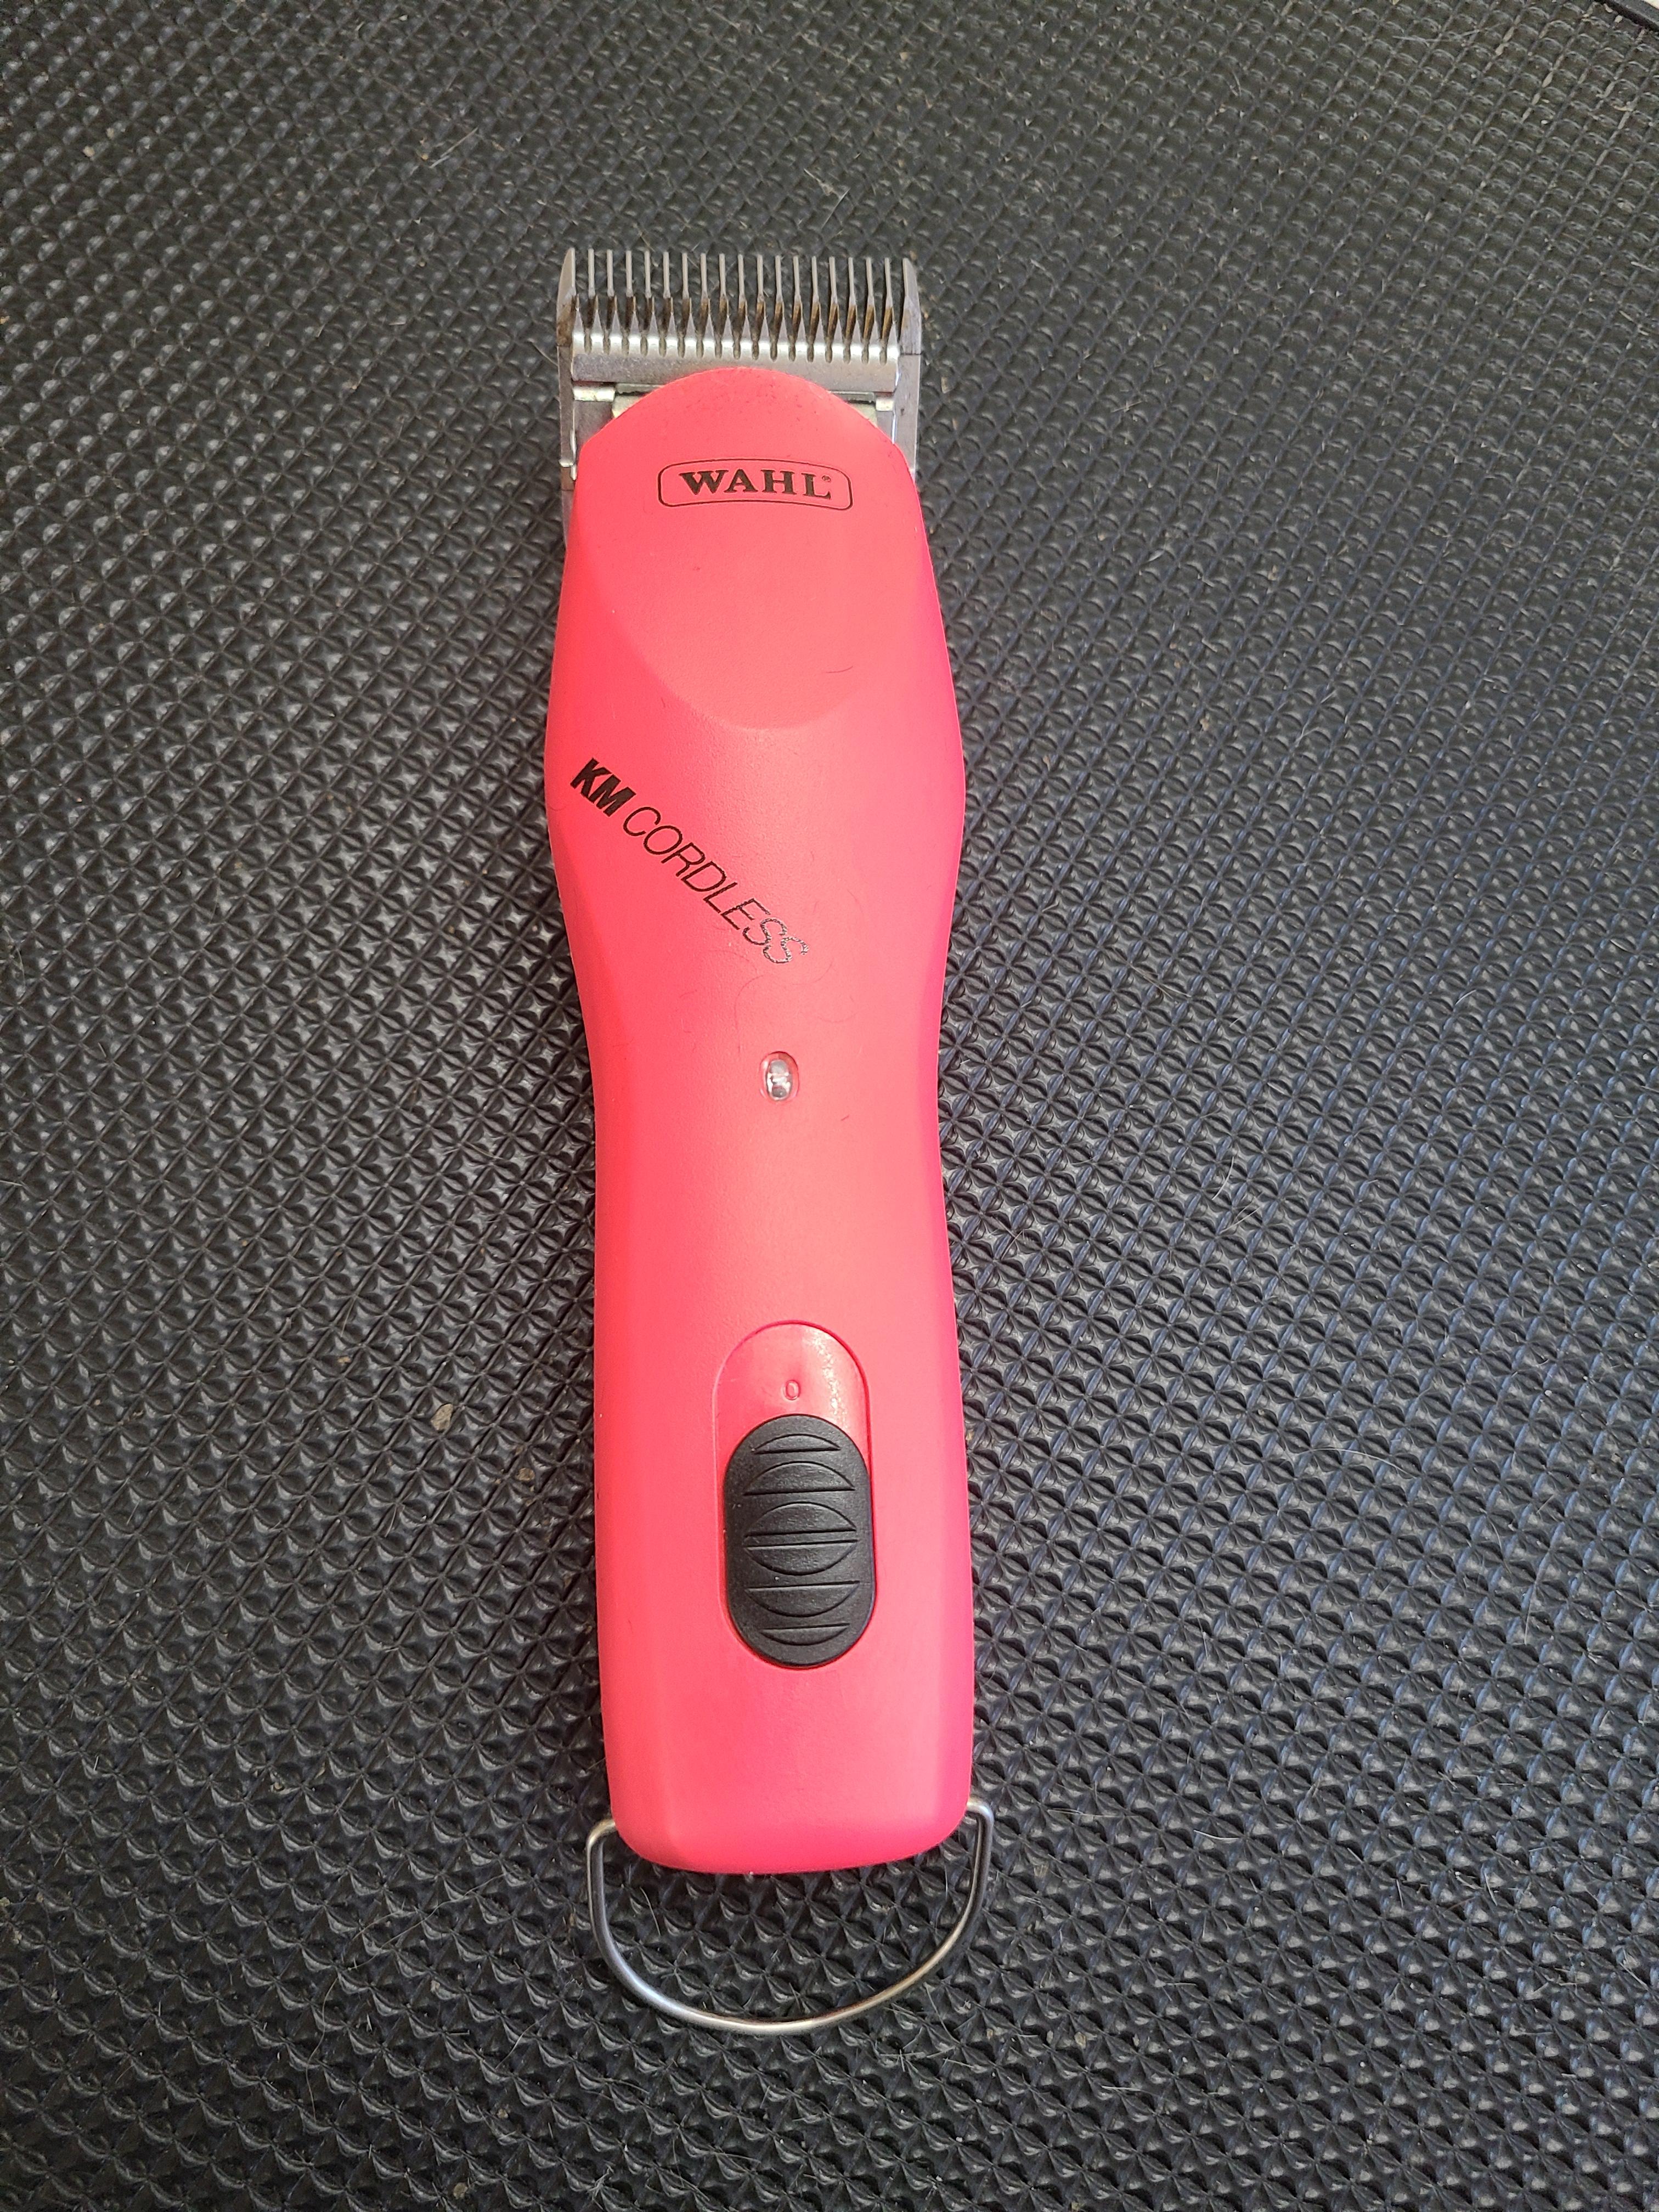 Wahl Professional Animal KM Cordless 2-Speed Detachable Blade Clipper (Poppy Red) with a Bonus Oil 4oz.